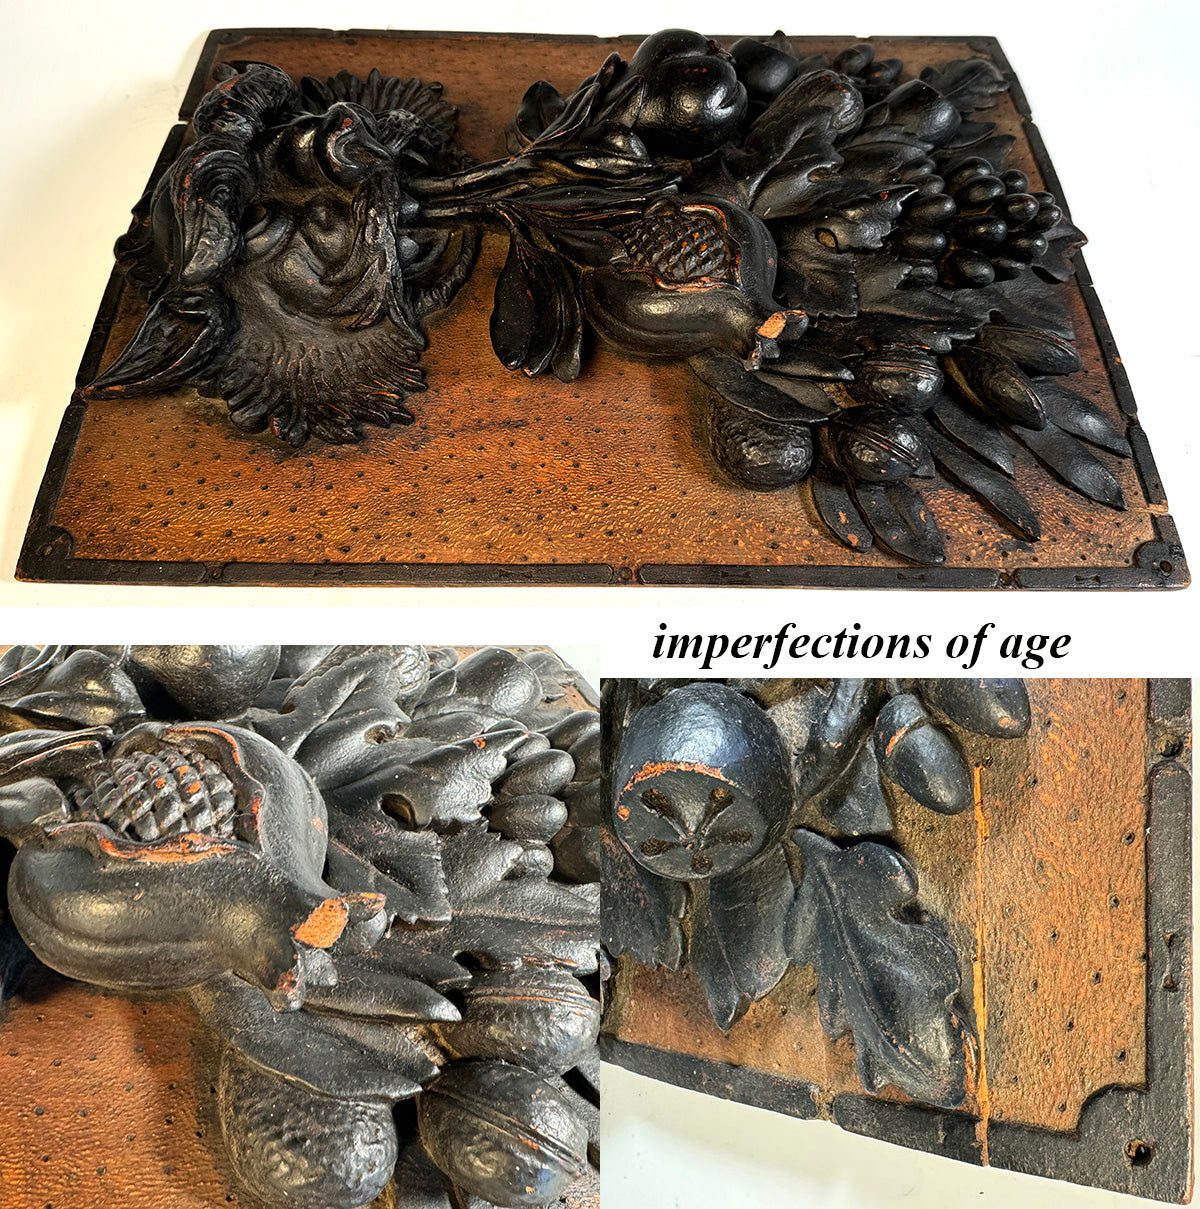 Fabulous Deep Bas Relief Hand Carved Figure and Fruit, a Panel Salvage from 18th c or Earlier.